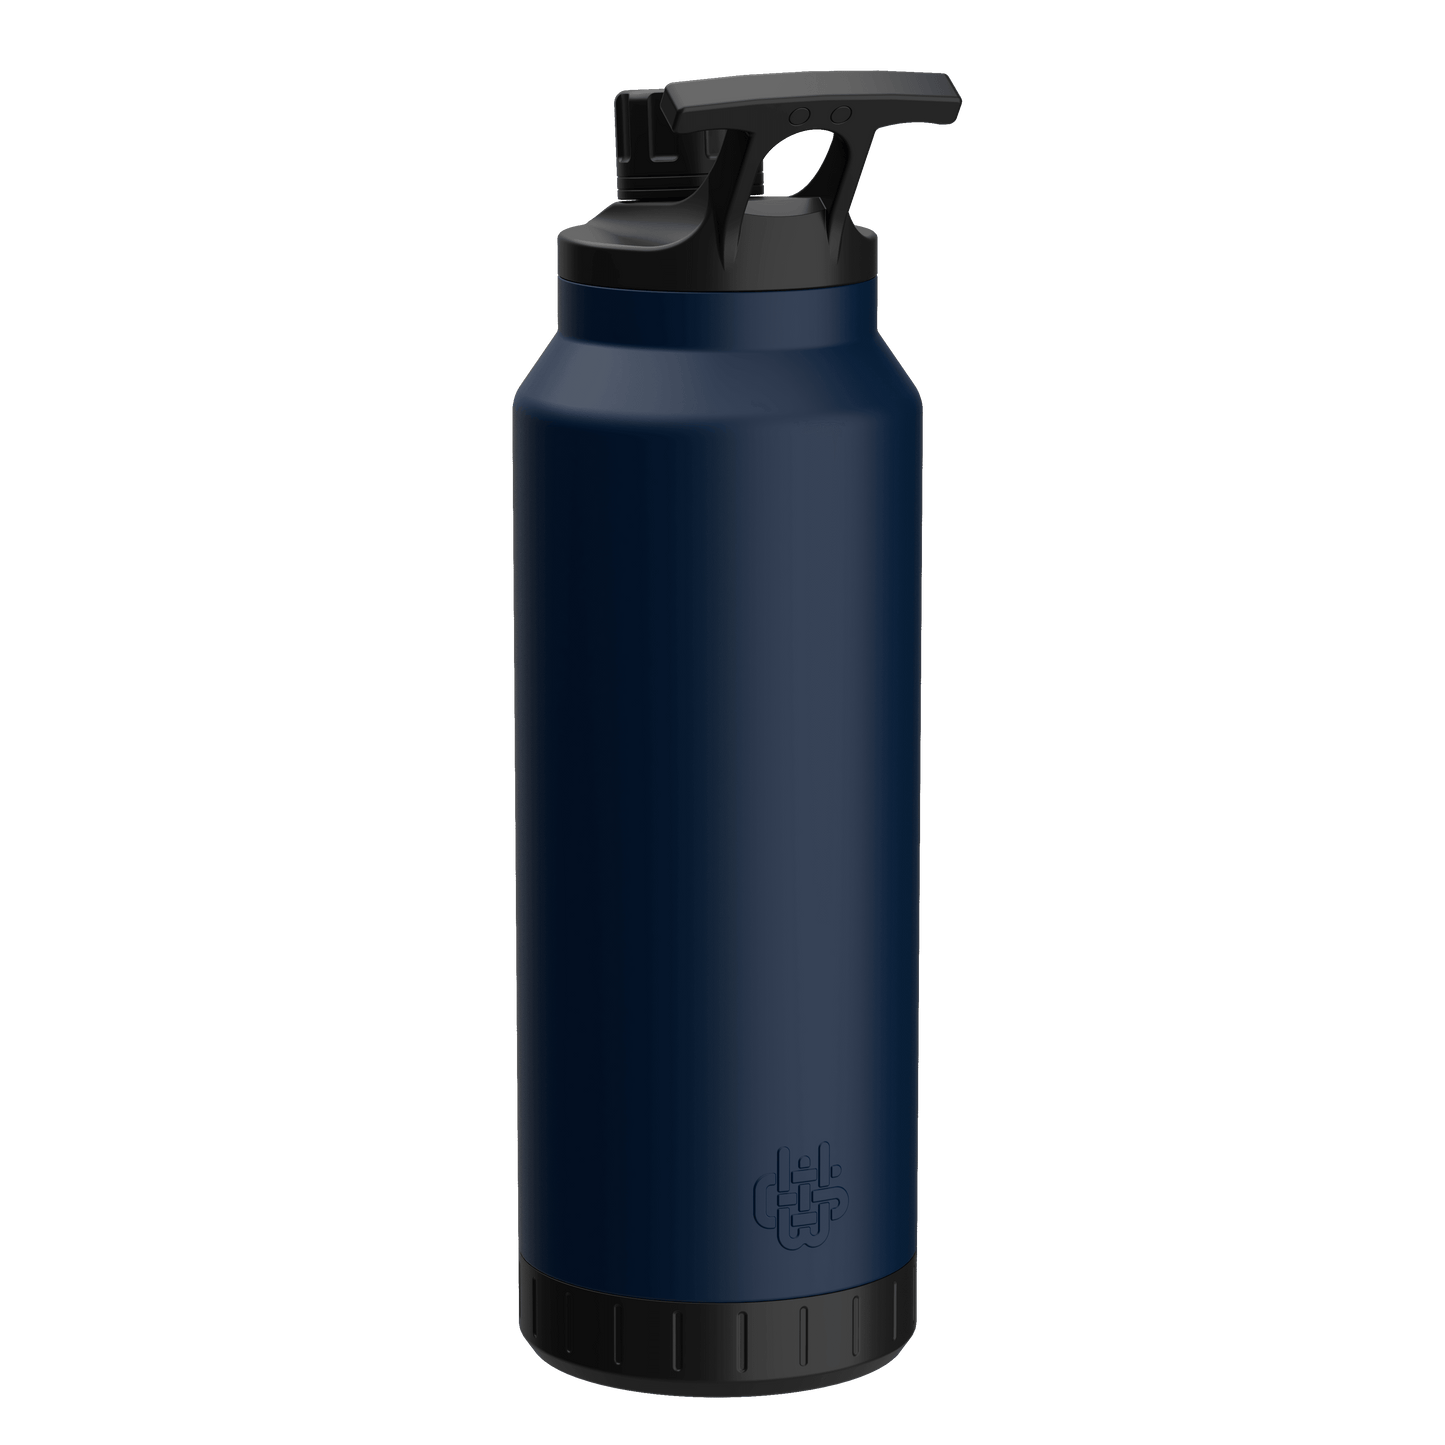 Wyld Gear 44 oz Mag Bottle in Multiple Color Options - Perfect Etch